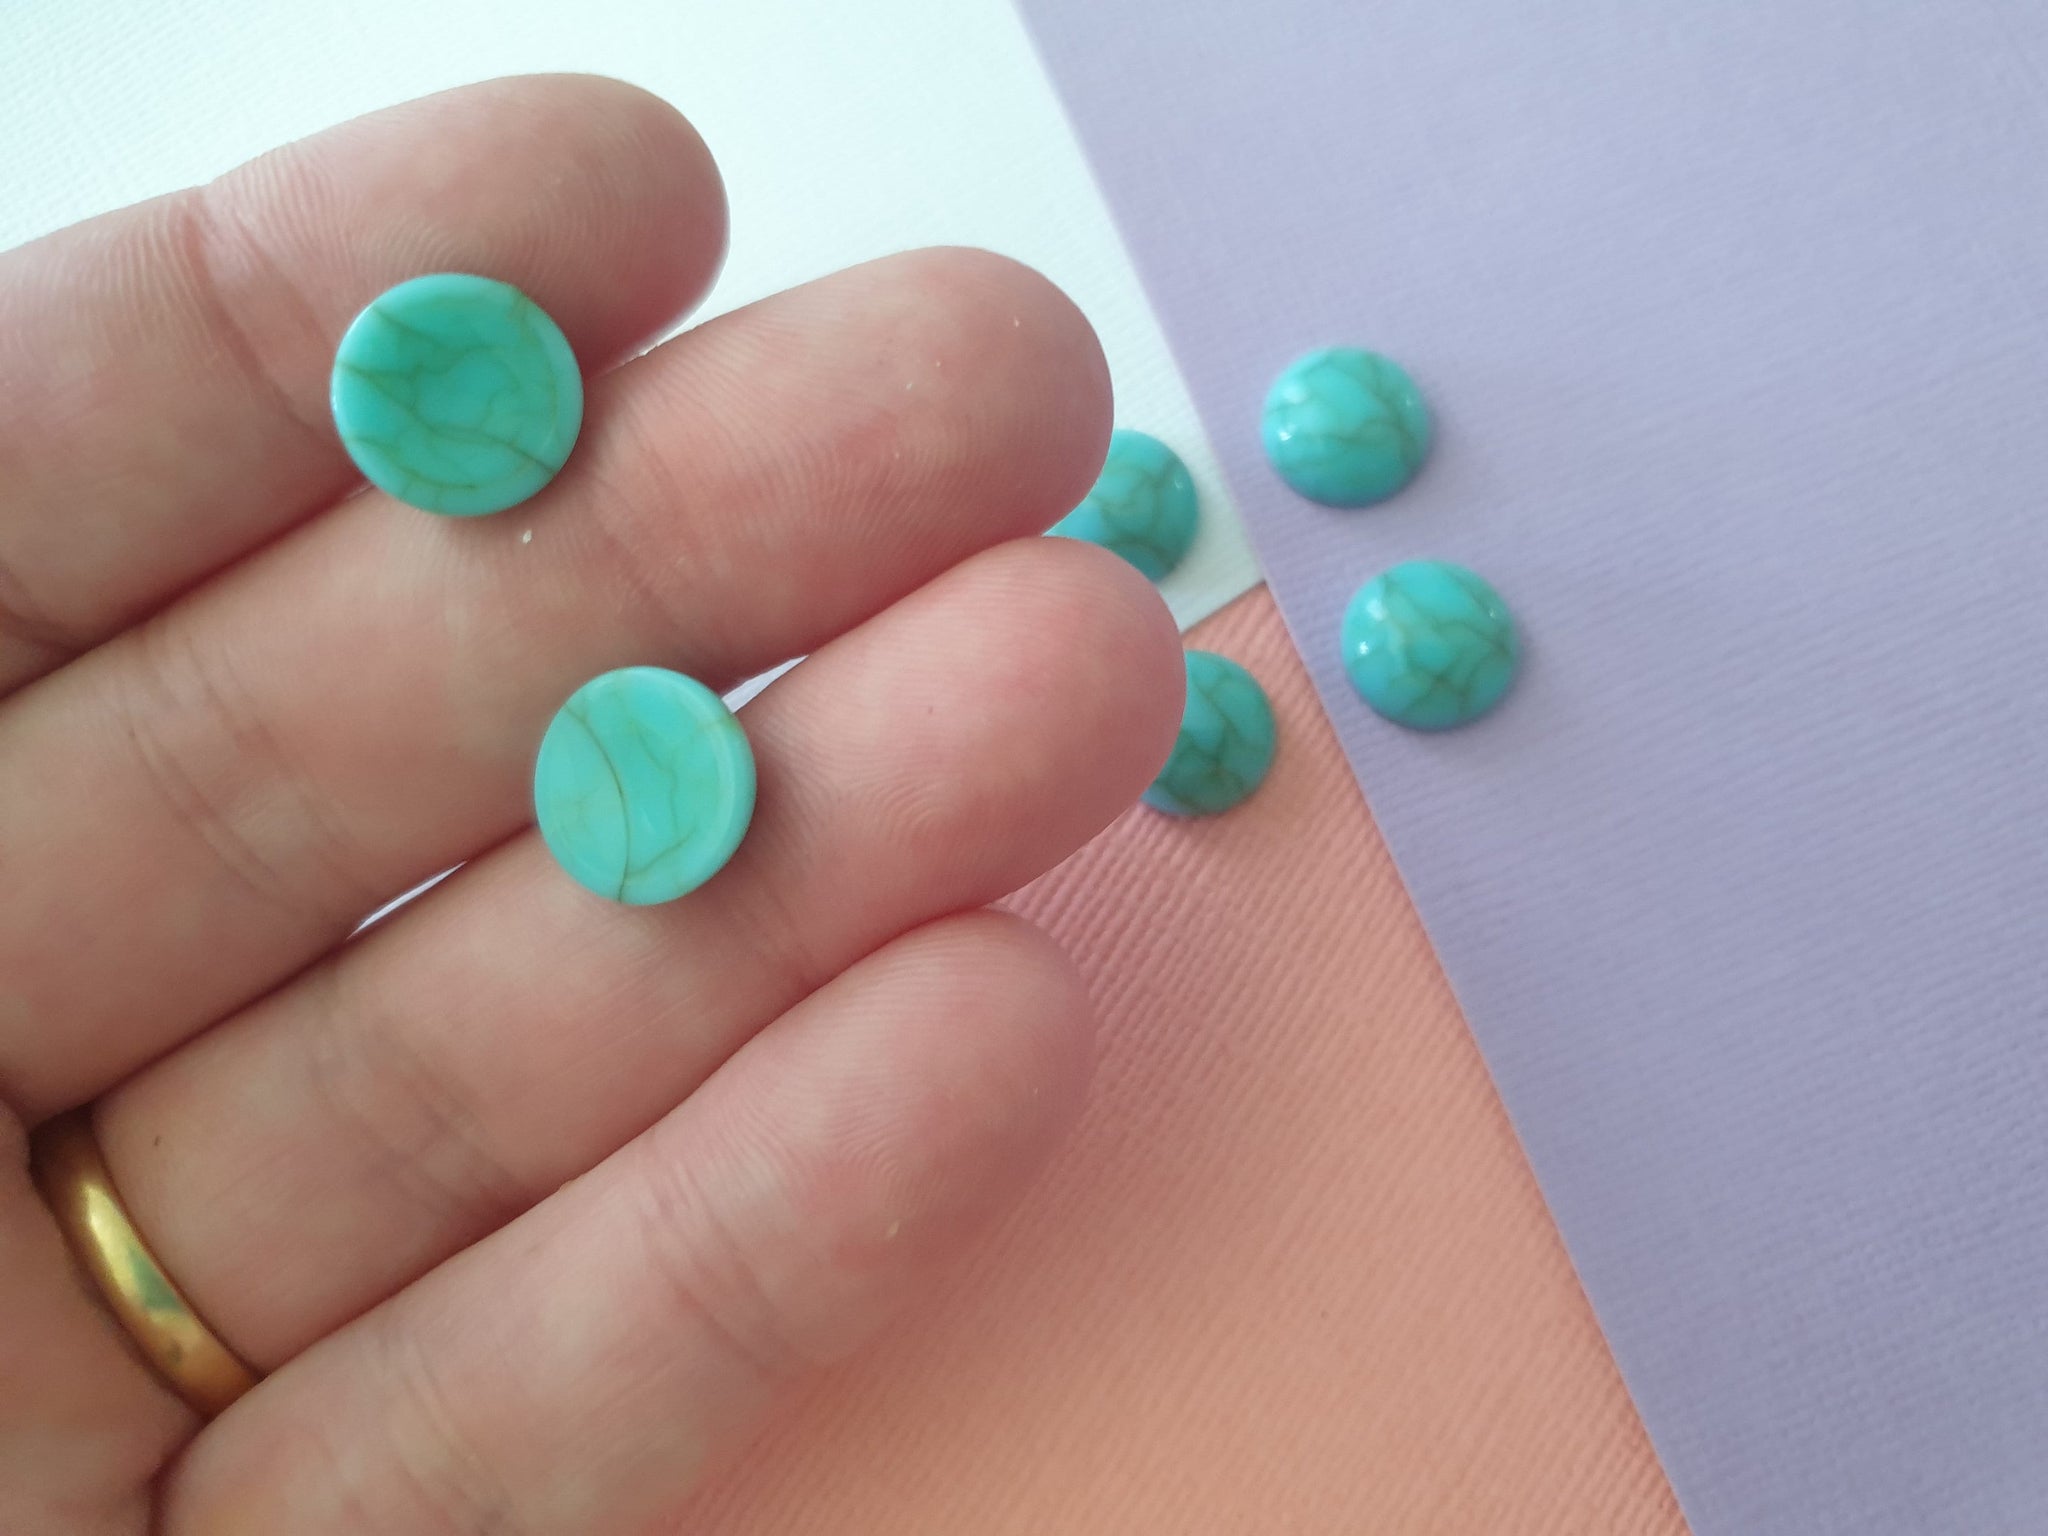 10pcs 12mm Green Color Turquoise Flat Back Resin Cabochons Cameo Jewellery supplies, findings, wholesale australia, DIY earrings, bracelet